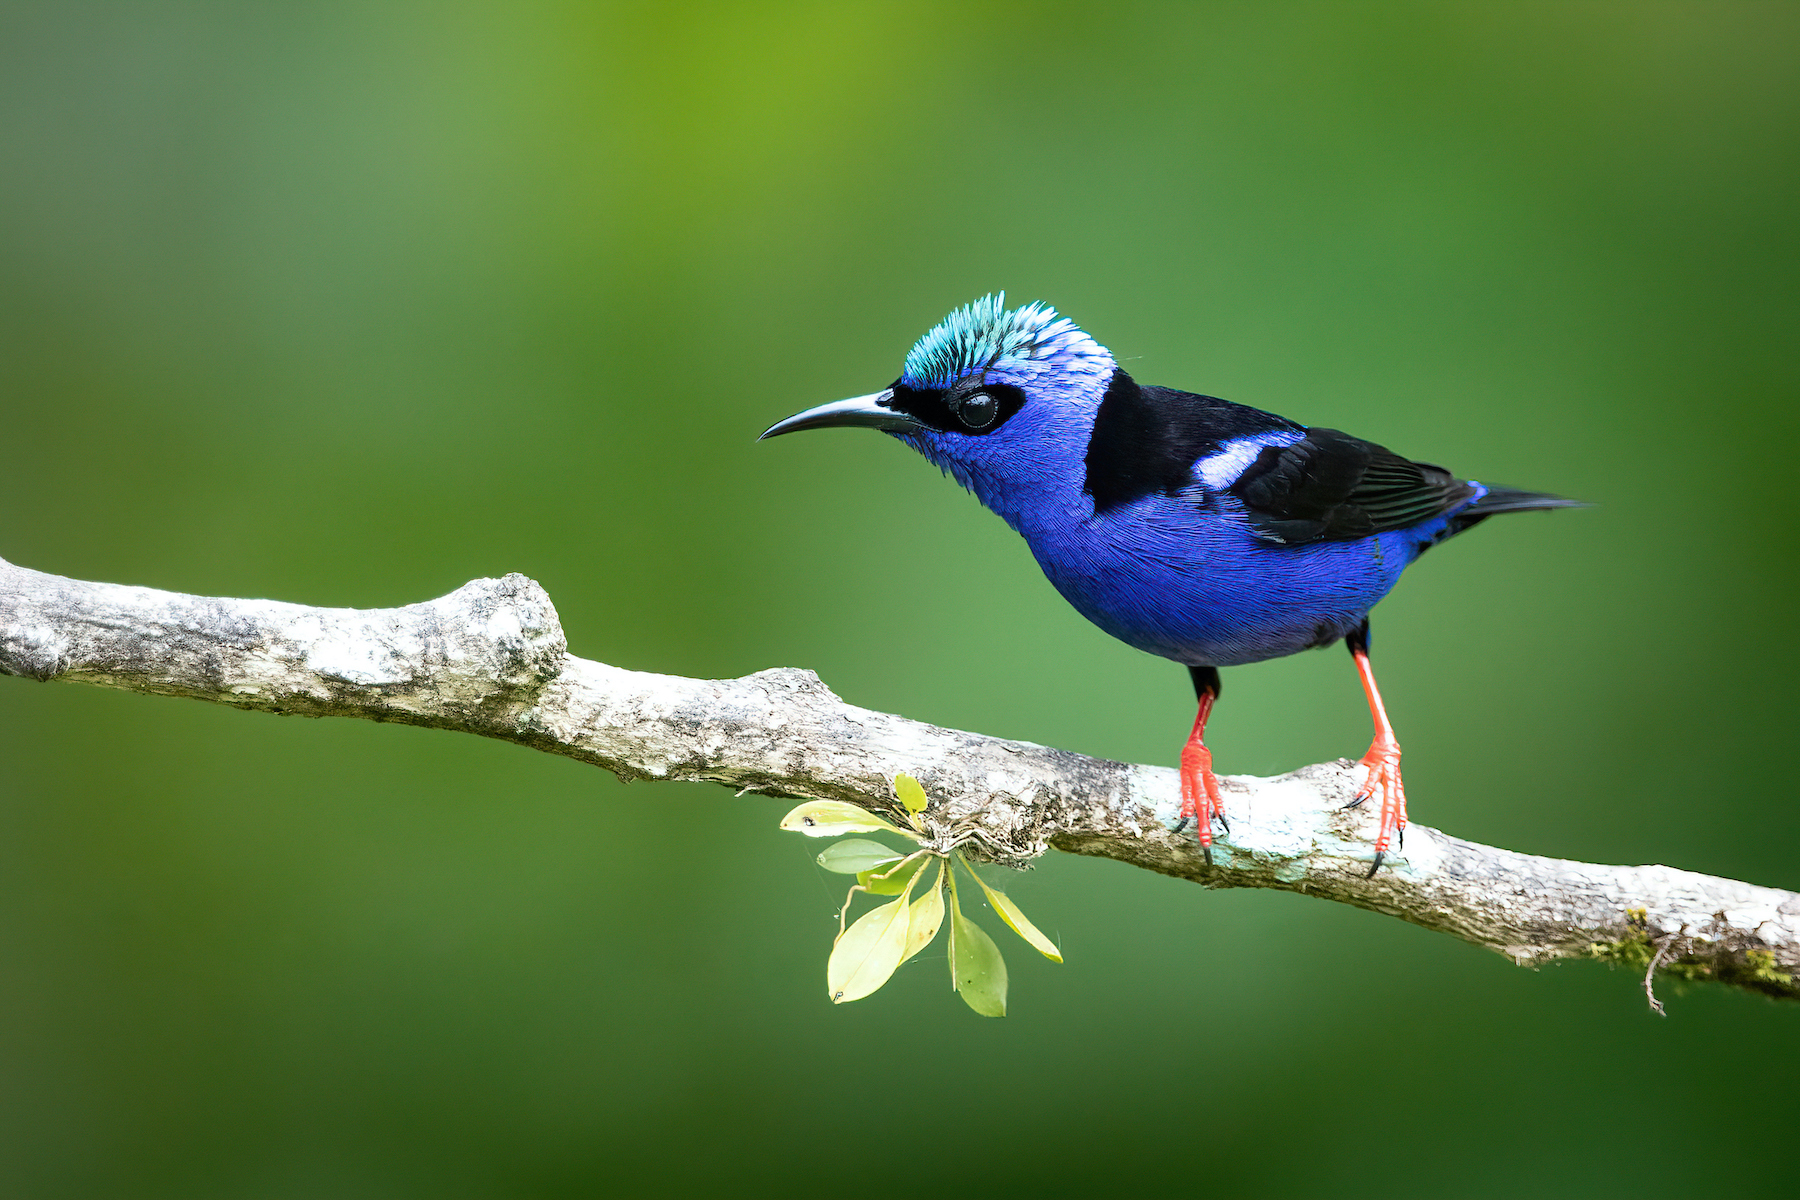 Costa Rica is a bird photographers paradise and Red-legged Honeycreepers are a definite highlight